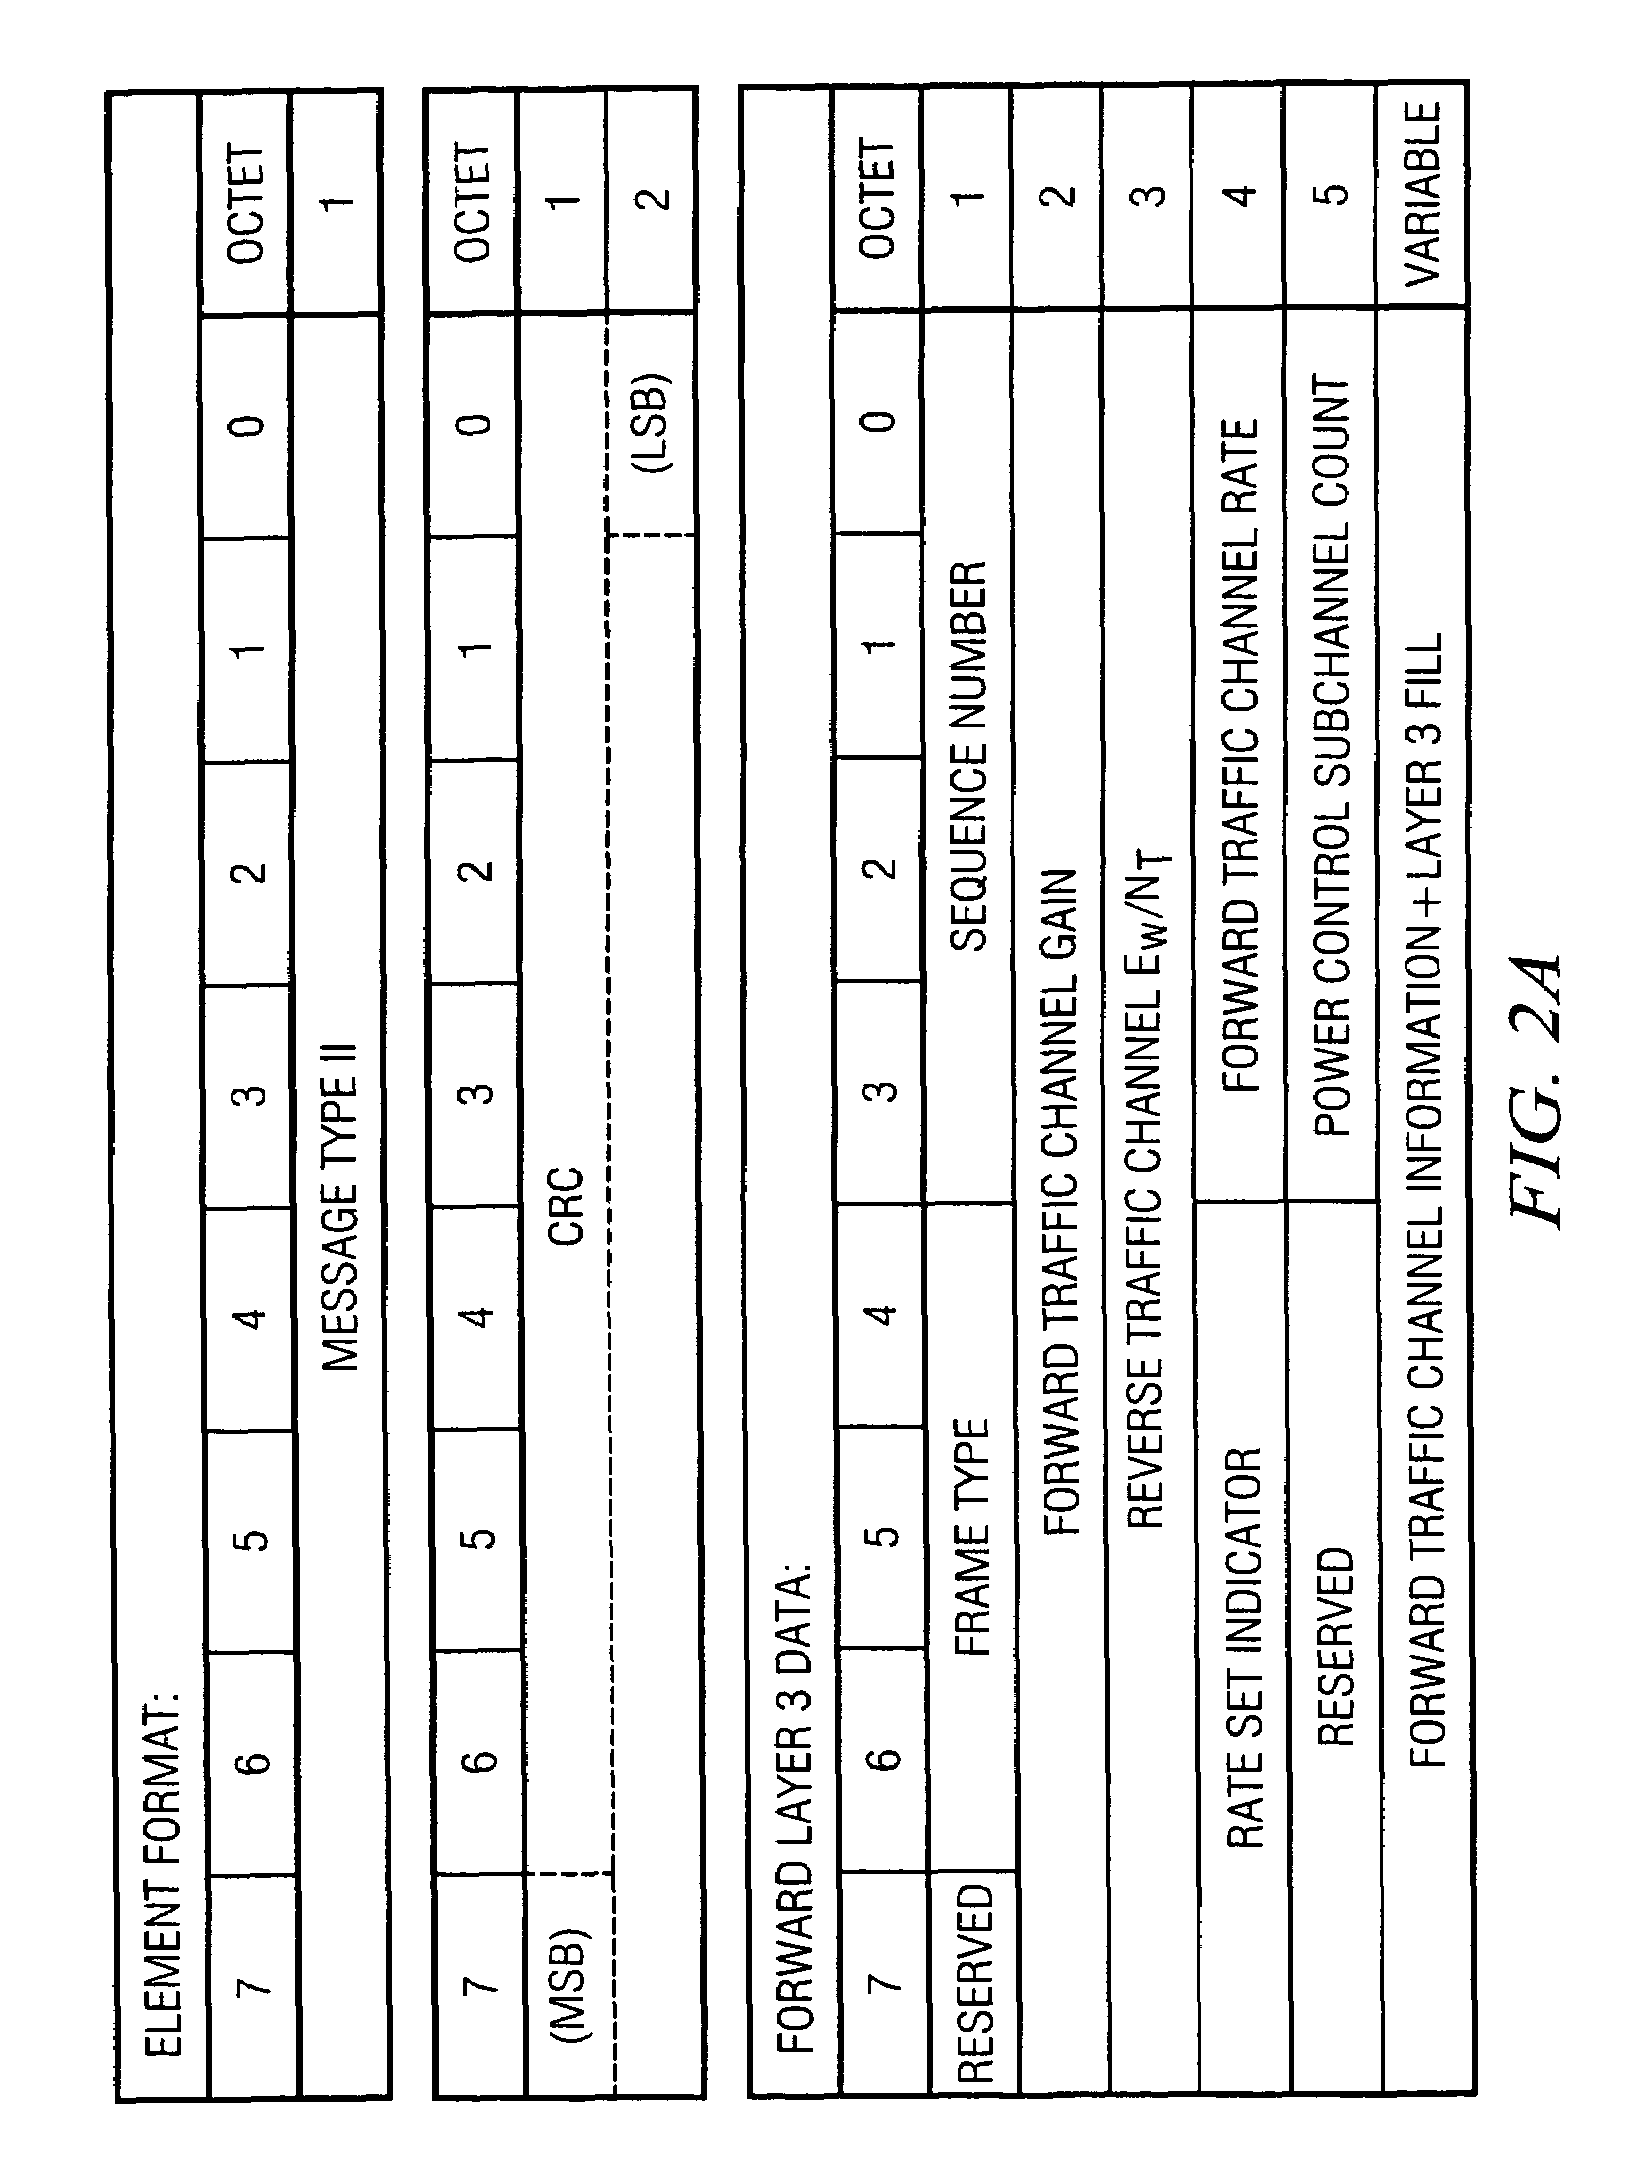 System and method for optimizing data transport in a communications system